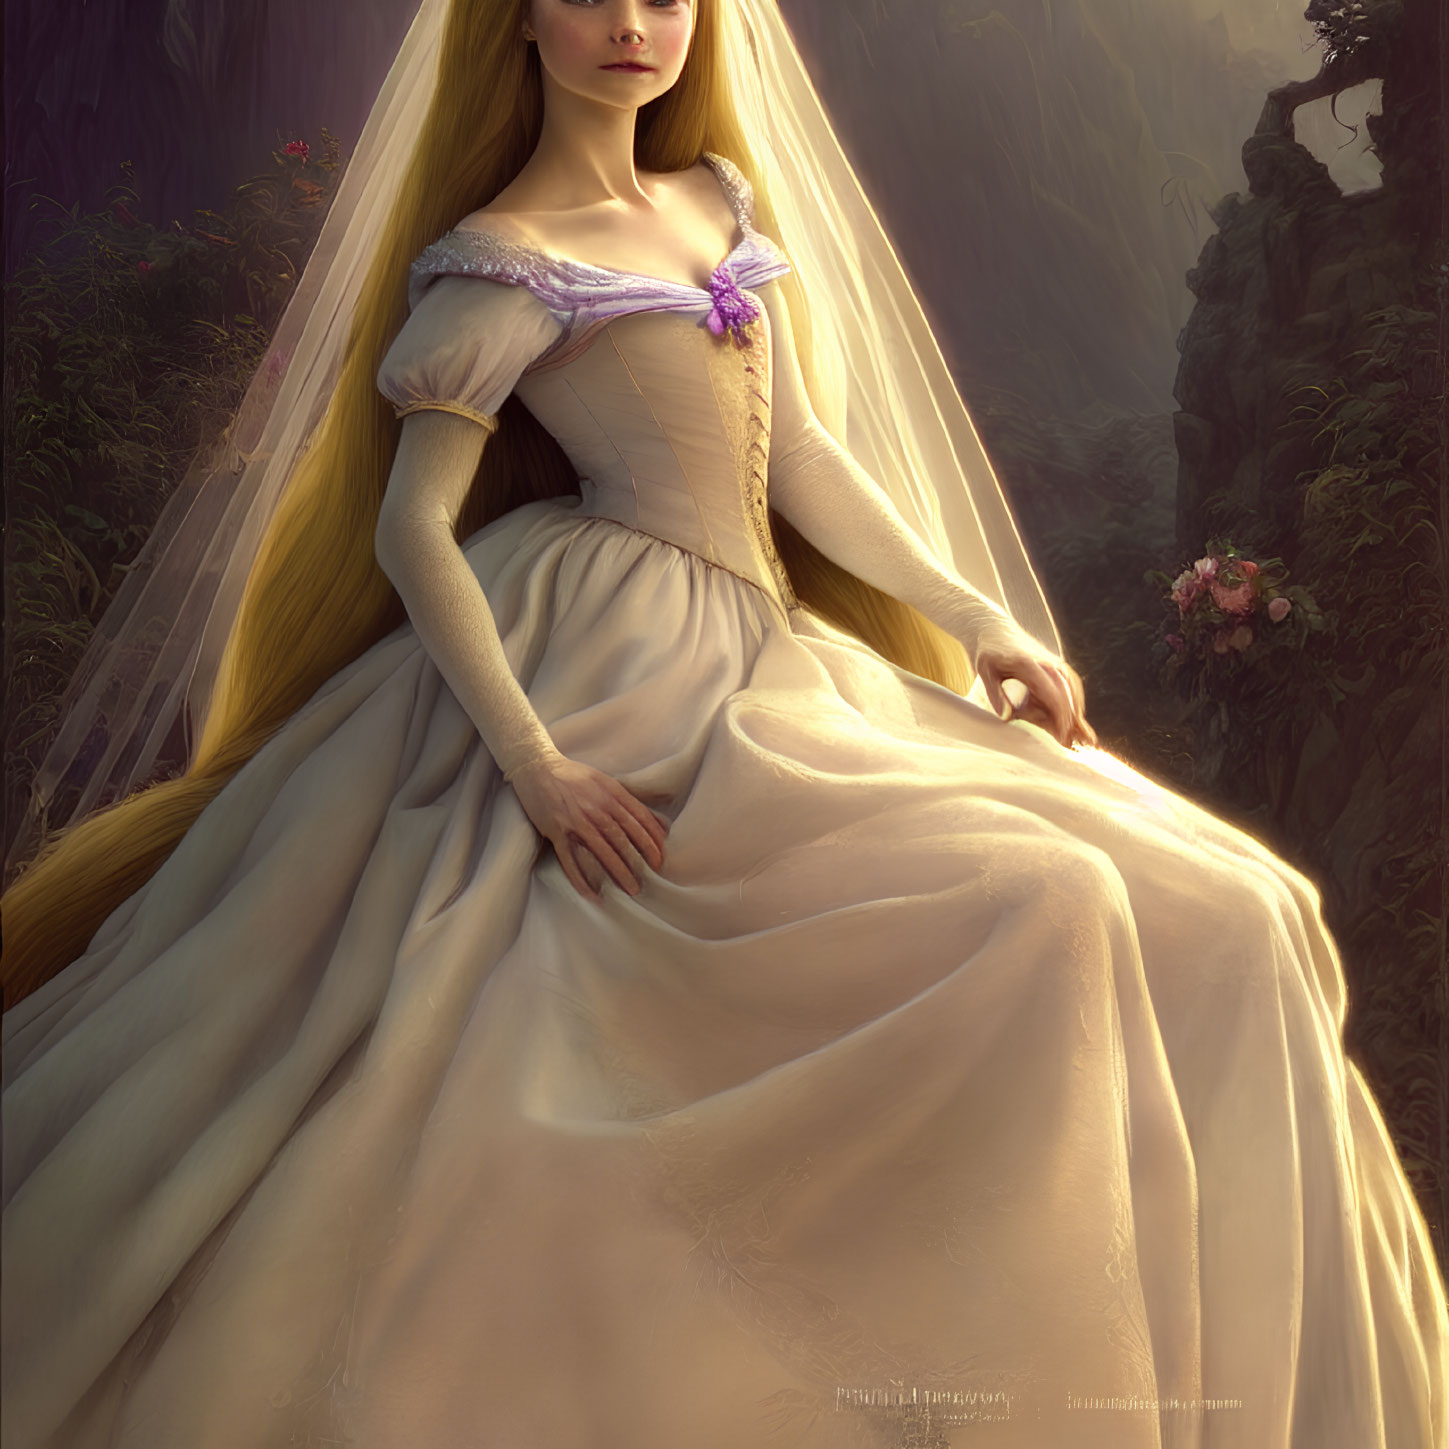 Elegant woman in flowing gown and veil in mystical woodland setting